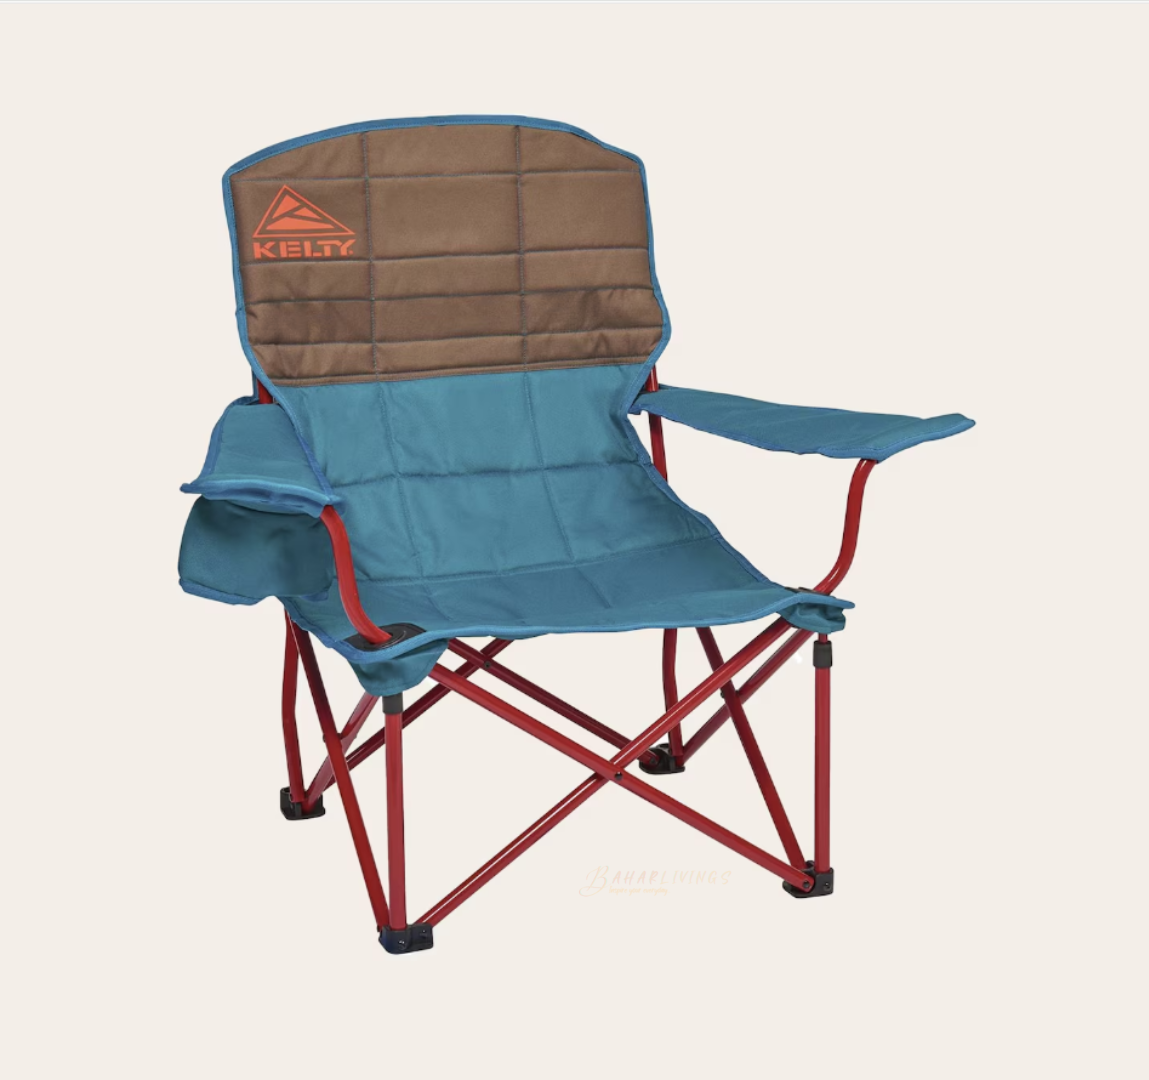 Top Pick: Kelty Lowdown Camping Chair - Ultimate Comfort Camping Chair